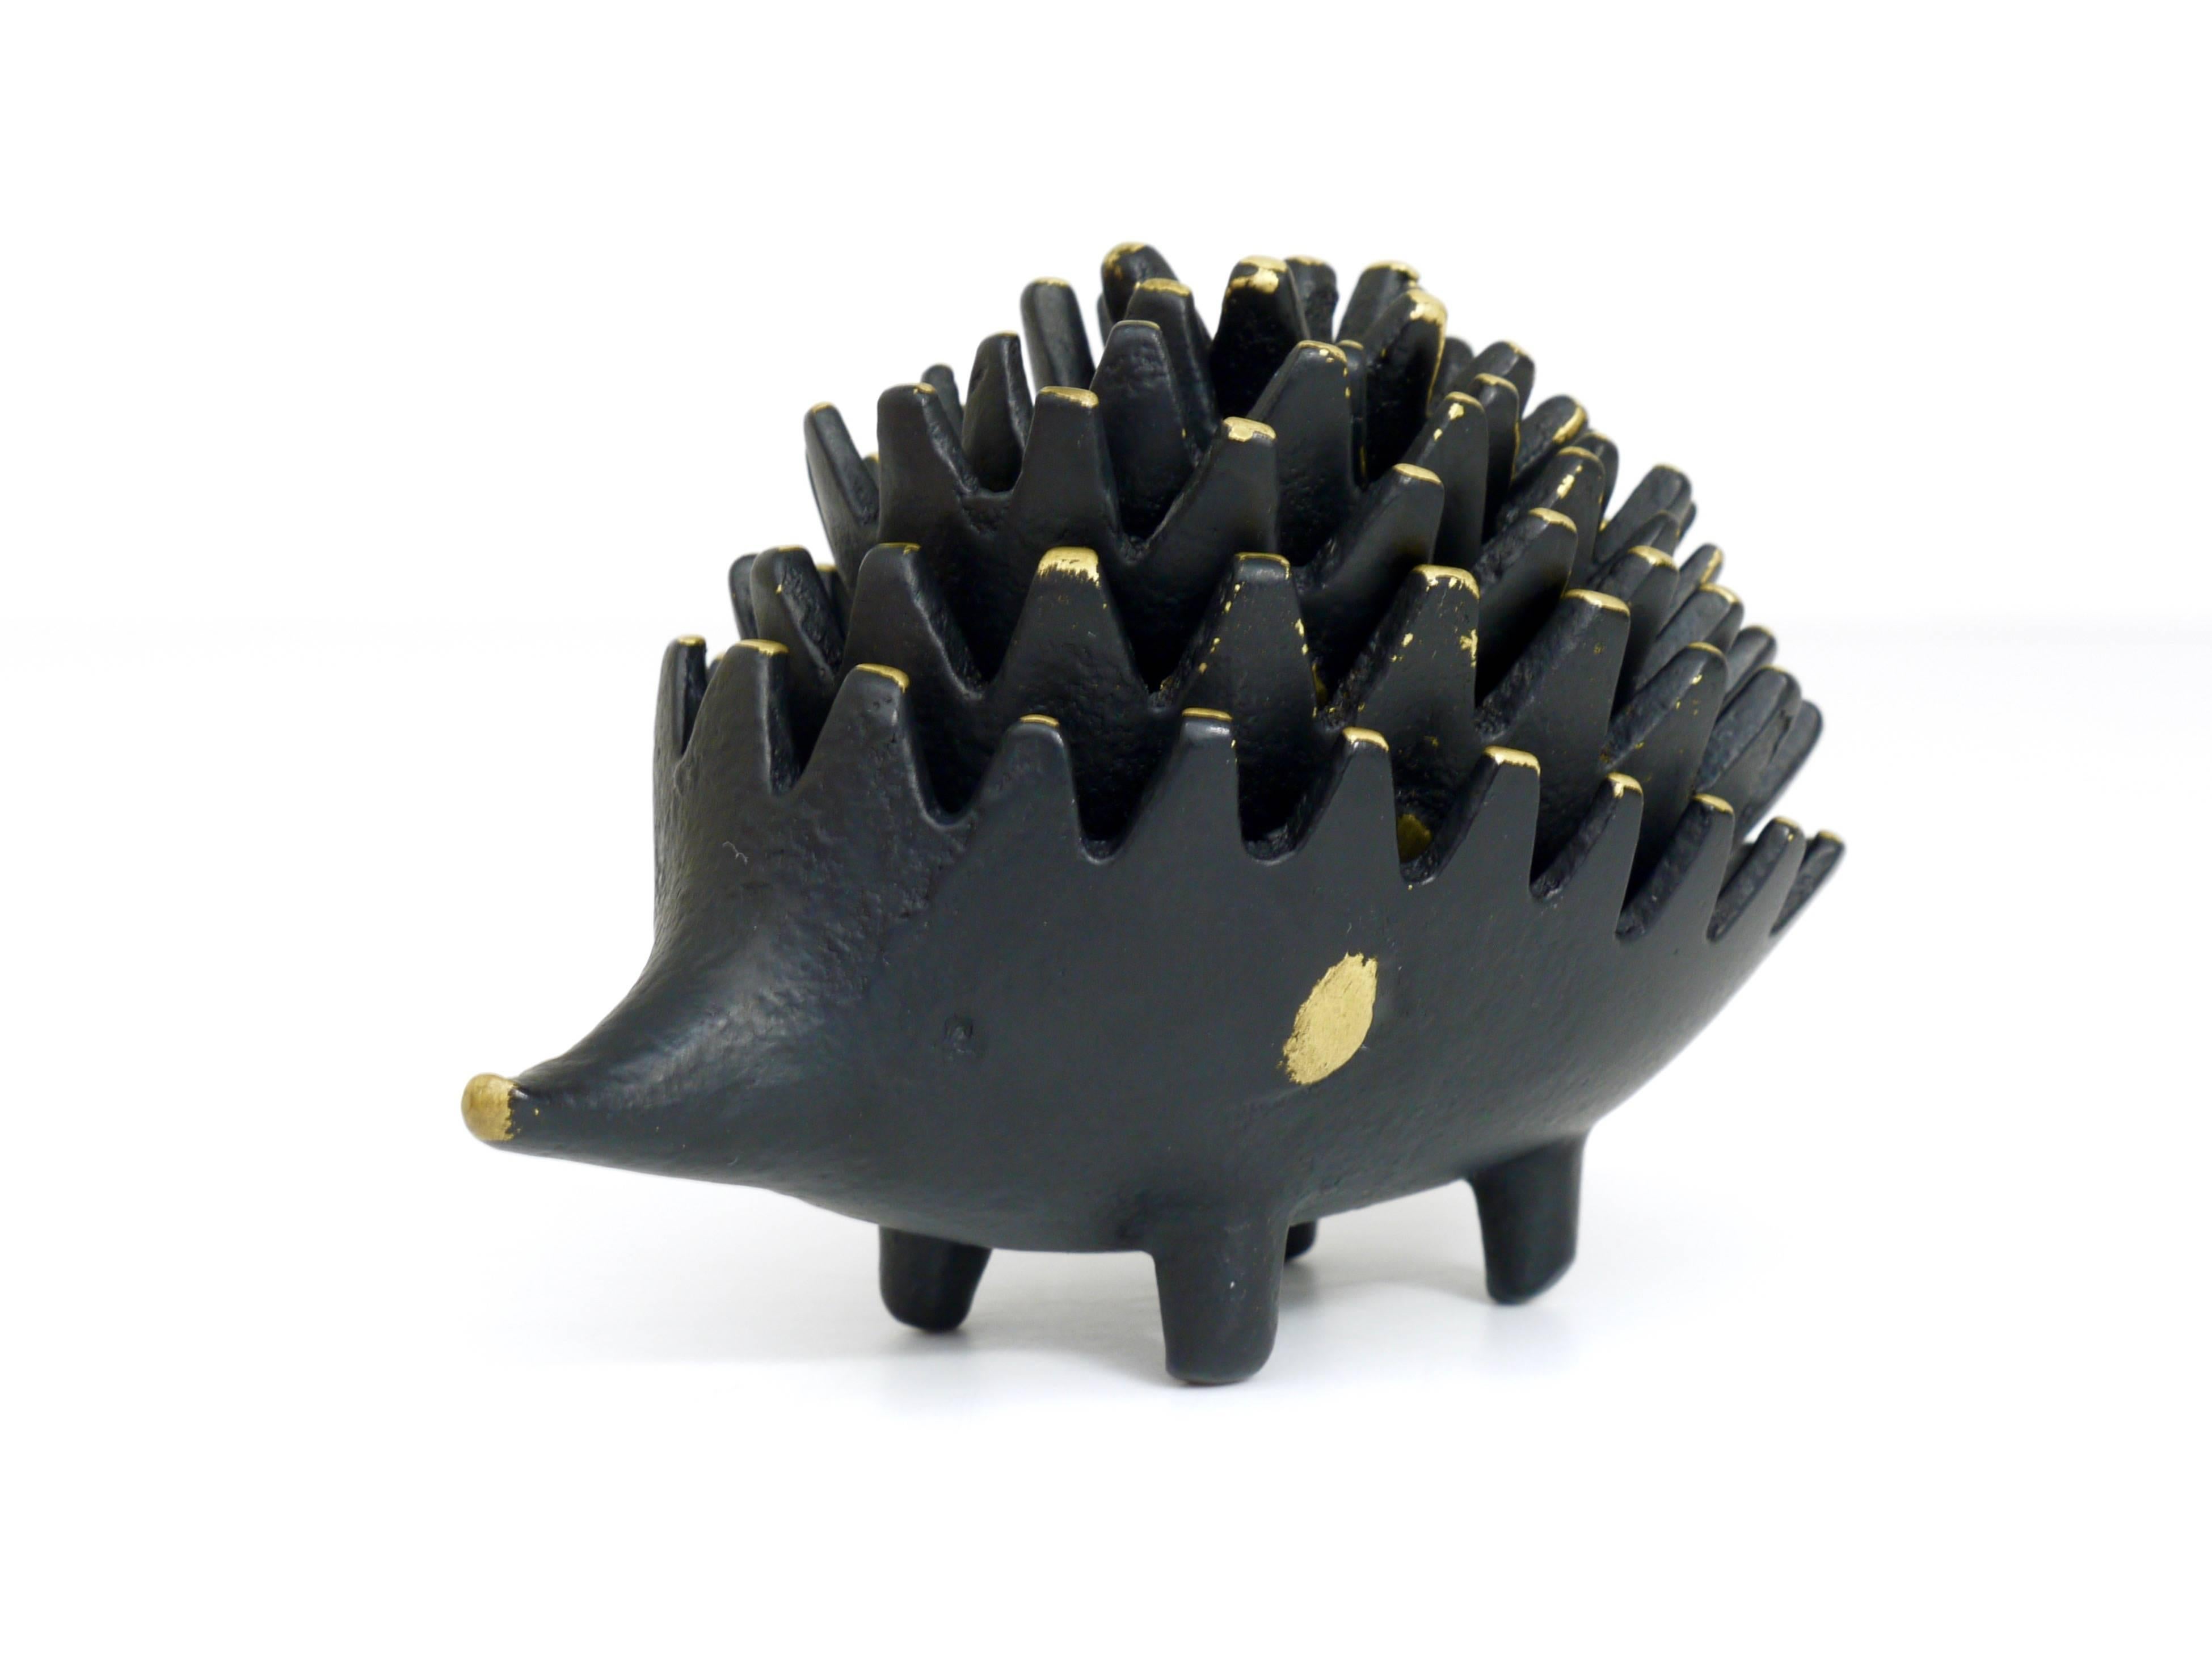 A complete set of six stackable hedgehog ashtrays. A very humorous design by Walter Bosse, executed by Hertha Baller Austria in the 1950s. Made of brass, in very good condition with nice patina.